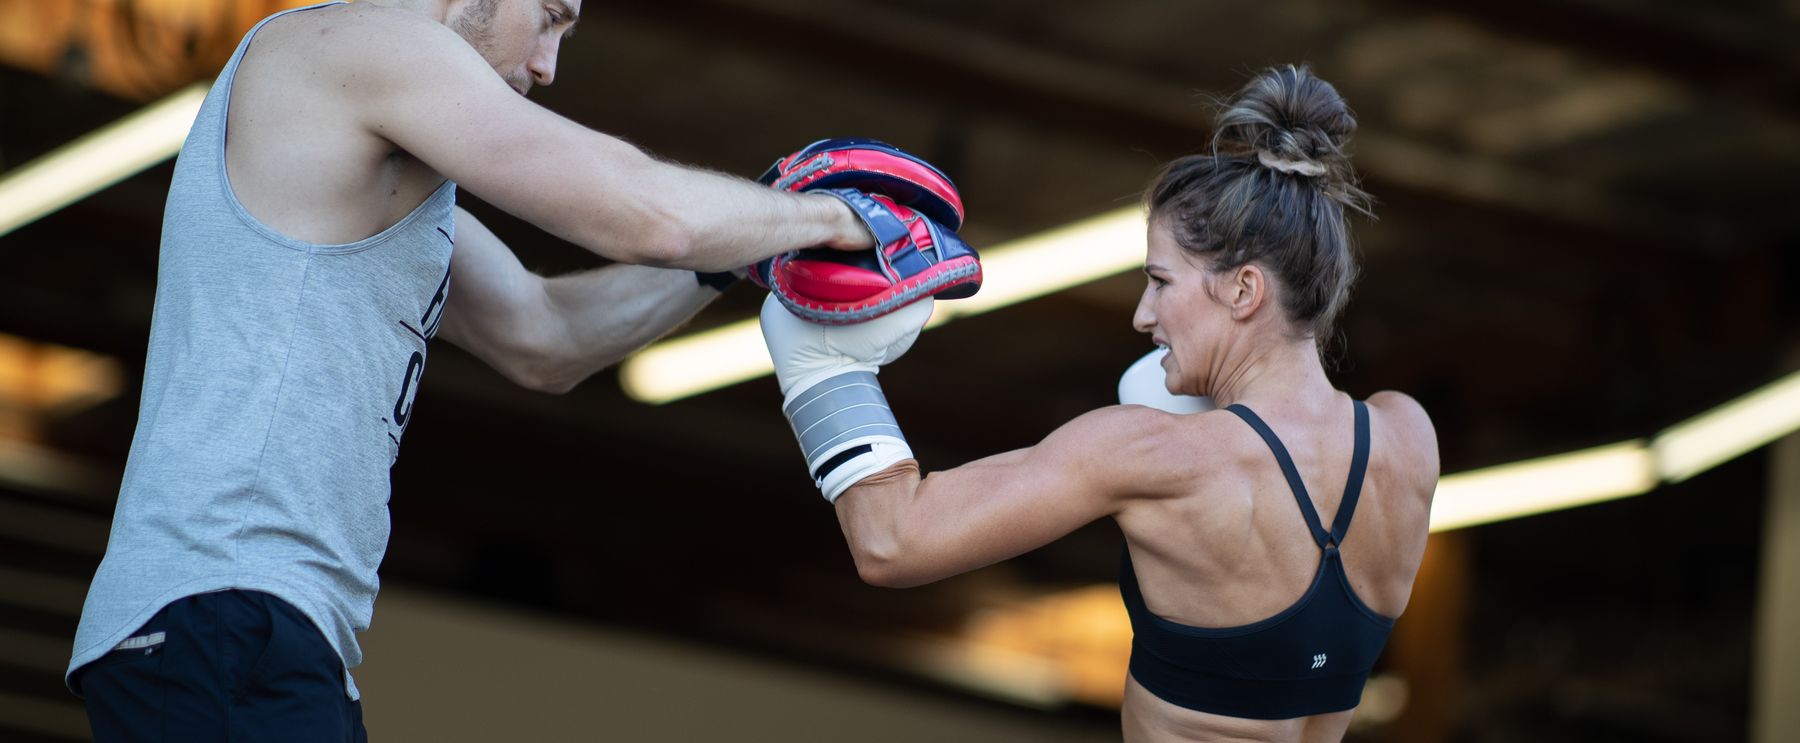 FightCamp - Boxing Training to Build Muscle & Get in Shape